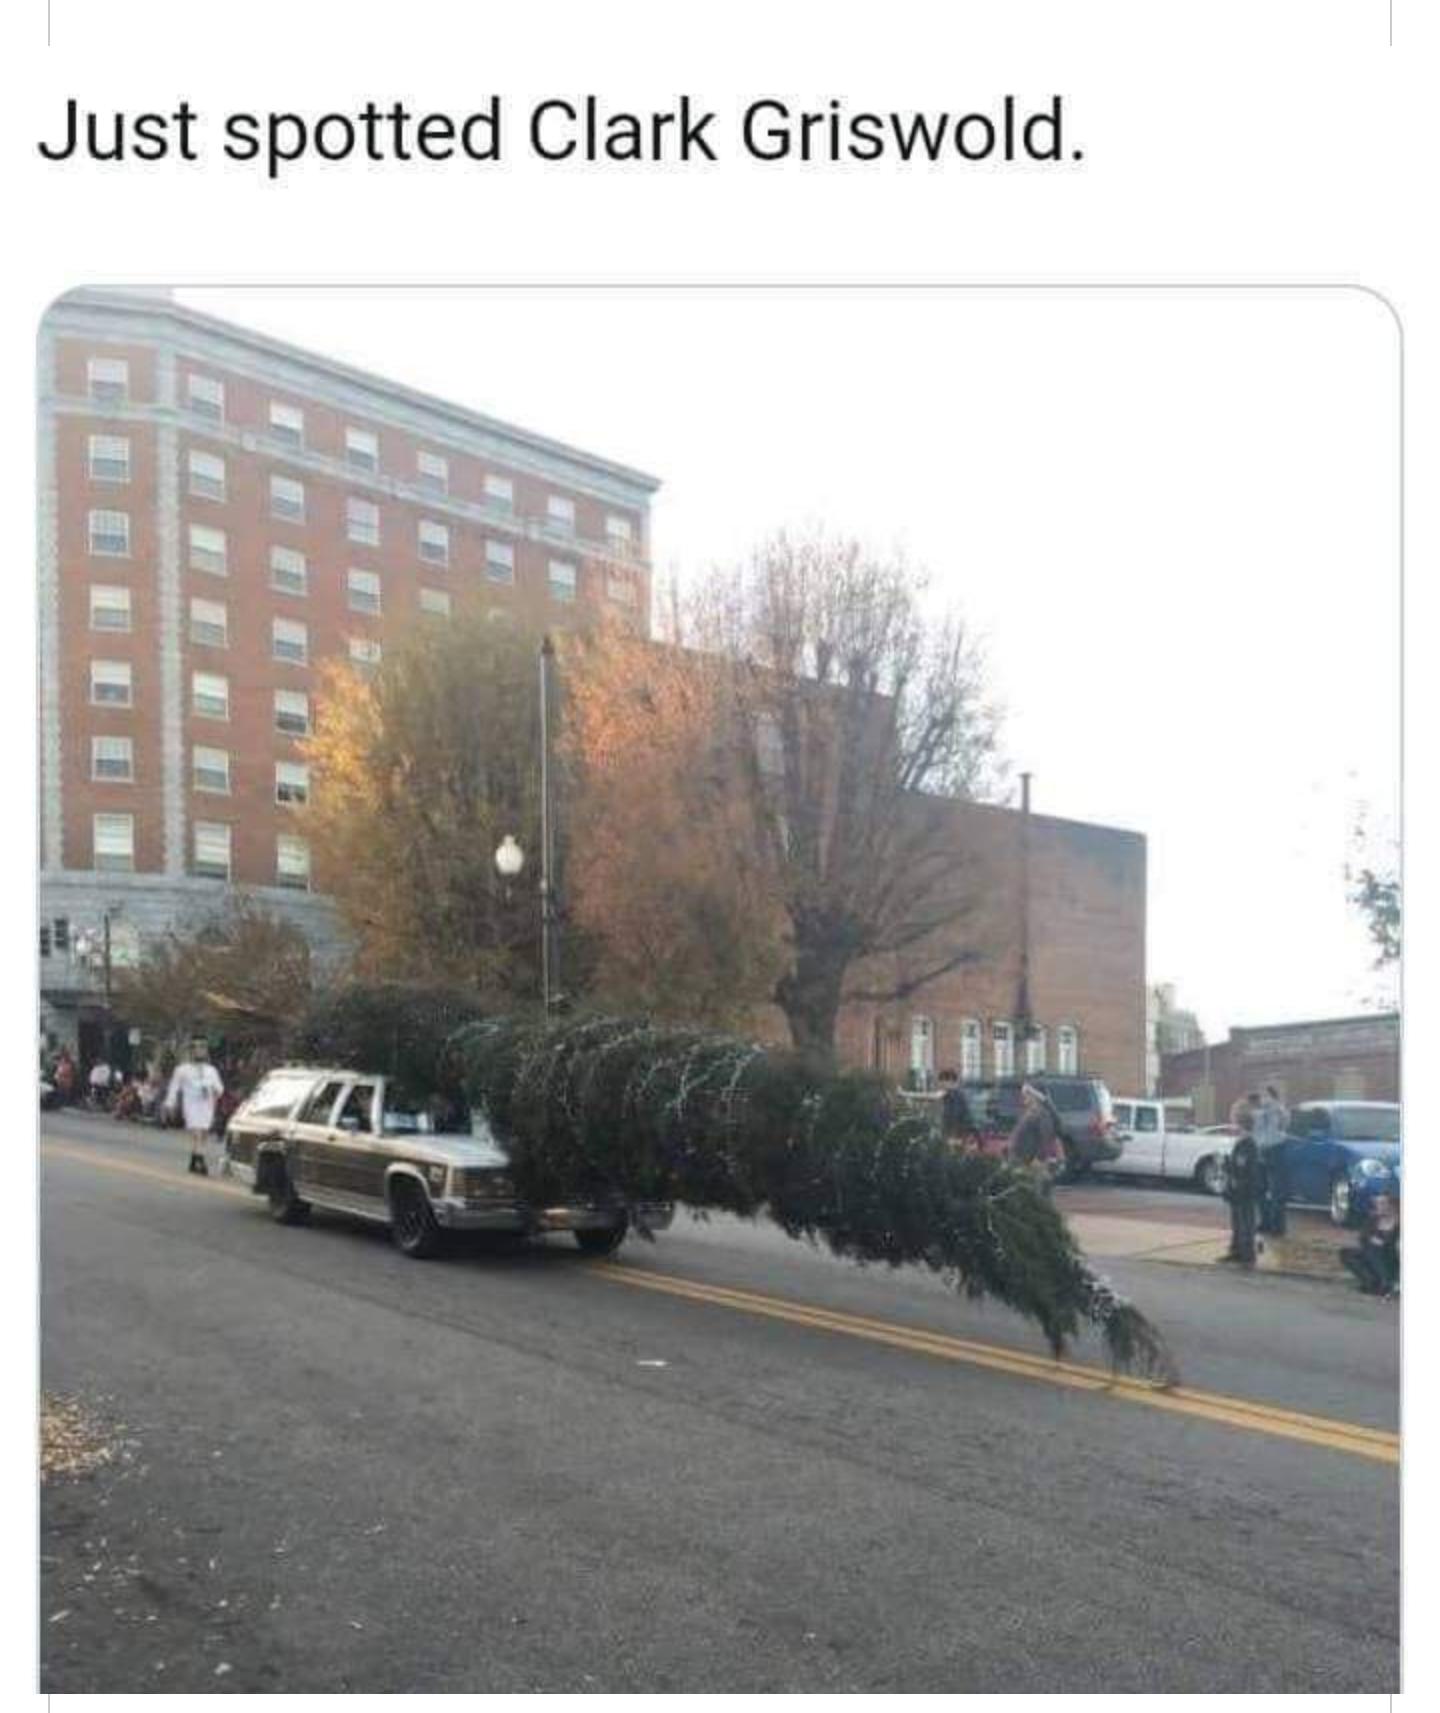 vehicle - Just spotted Clark Griswold.